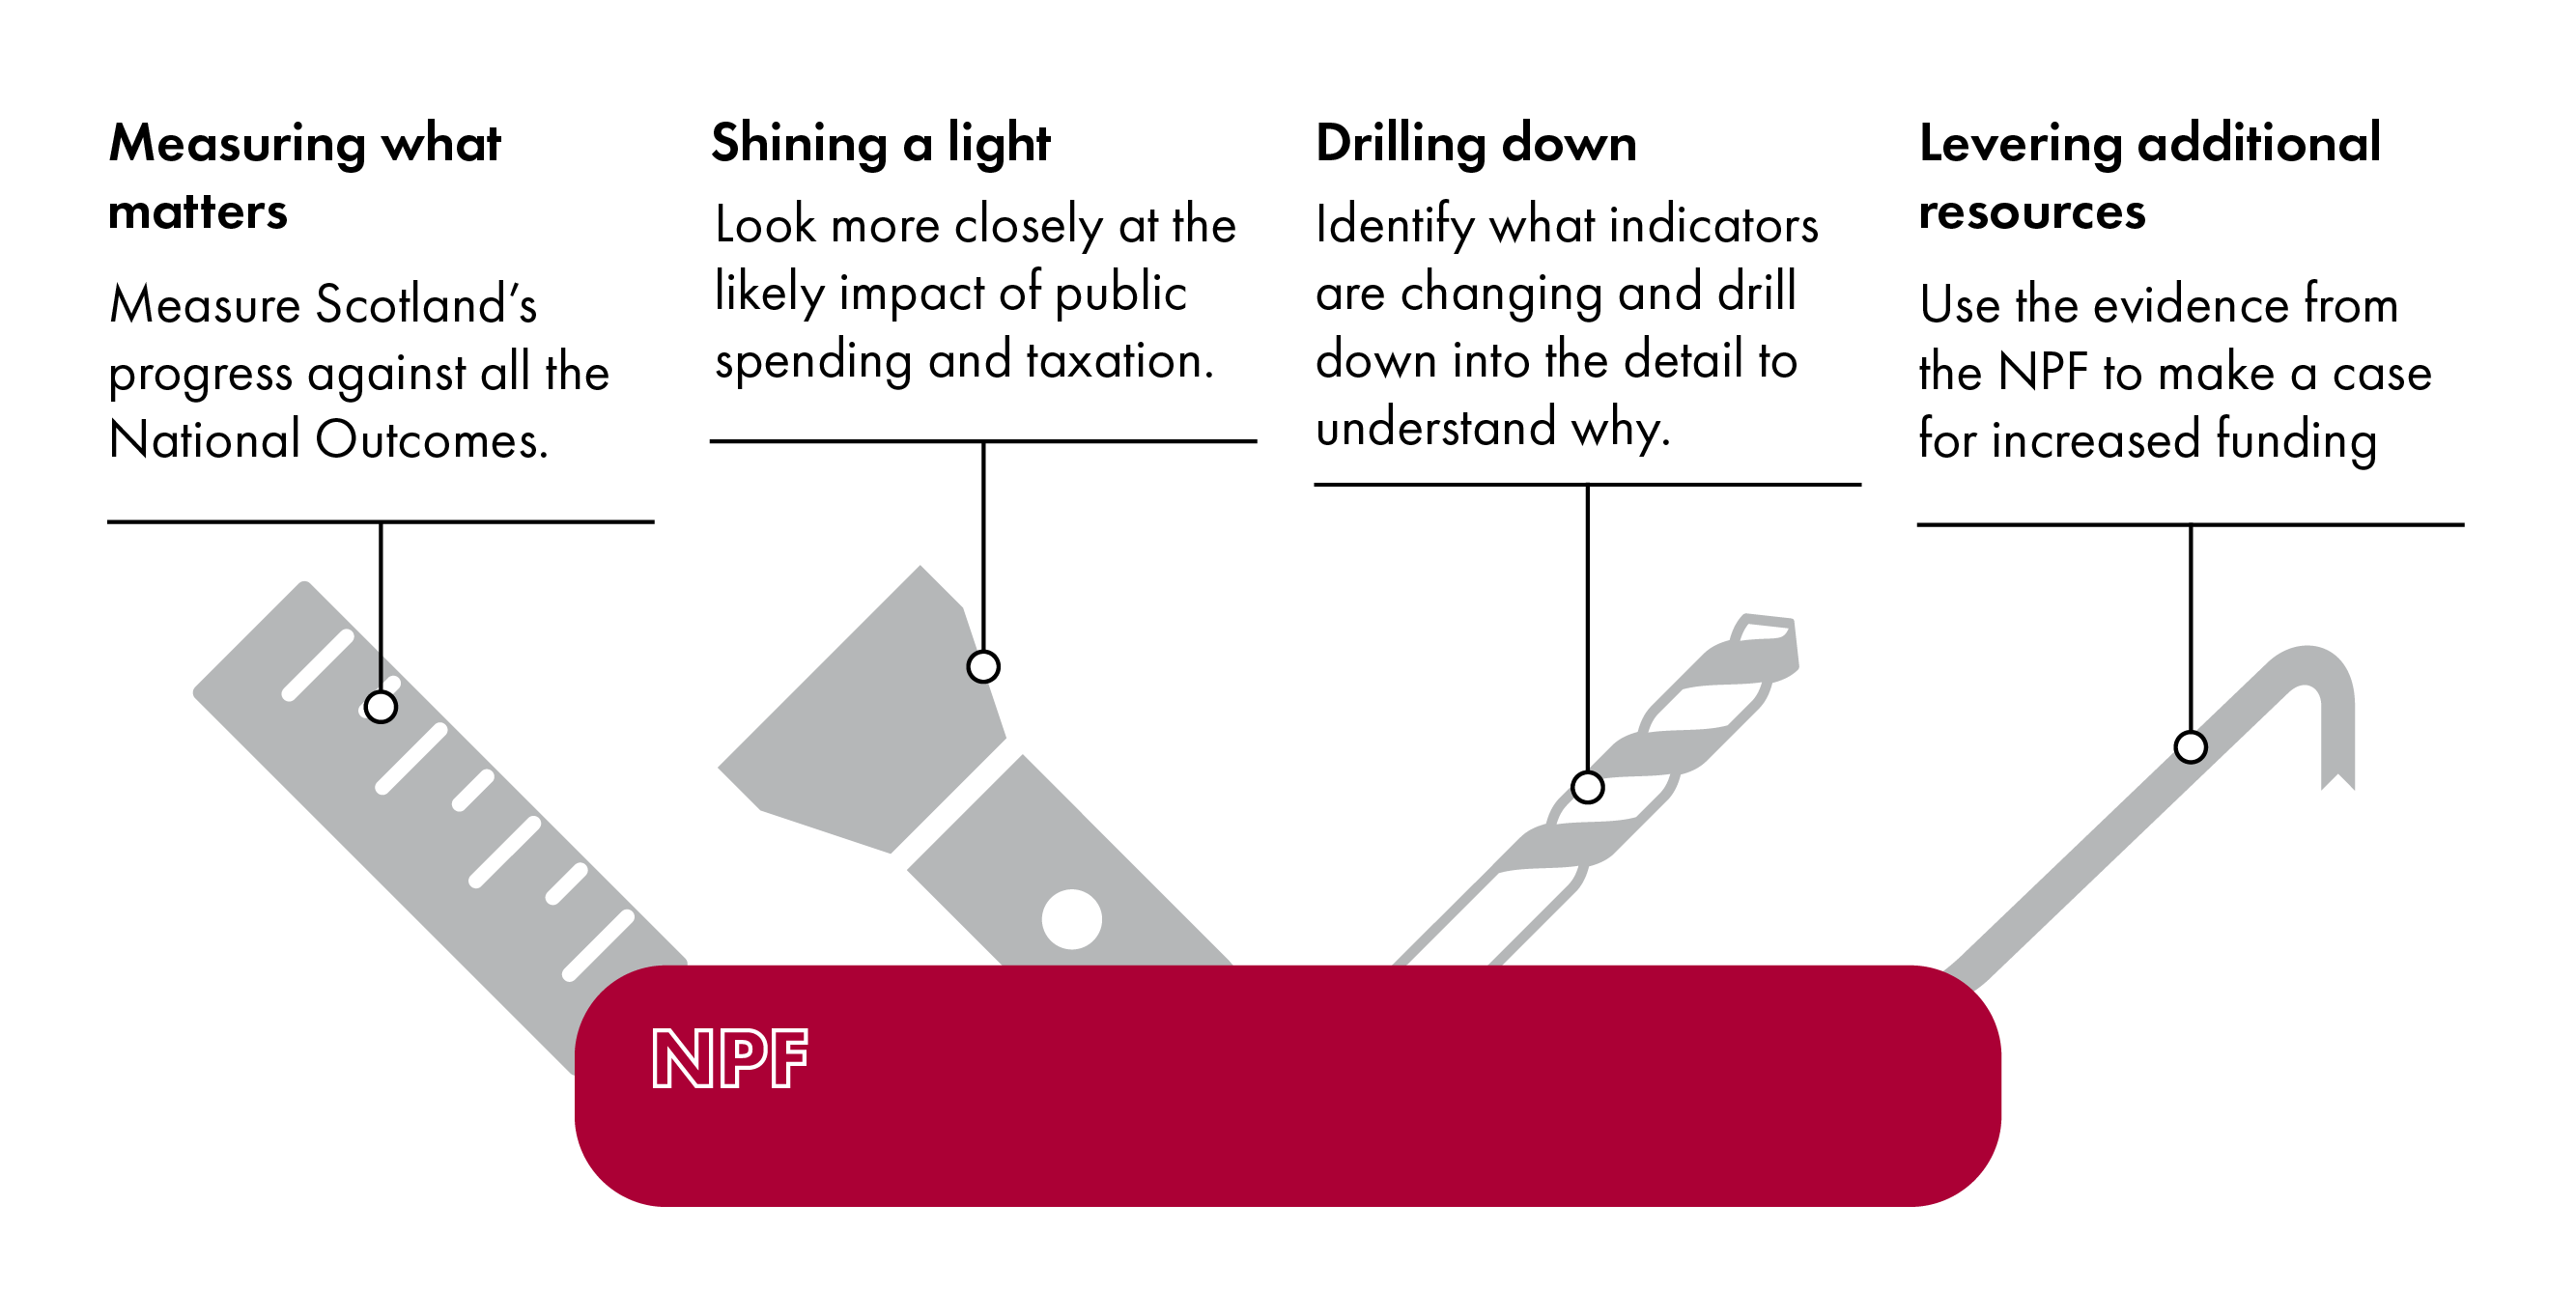 This infographic illustrates four tool functions of the NPF: measuring what matters, shining a light, drilling down and levering additional resources.  